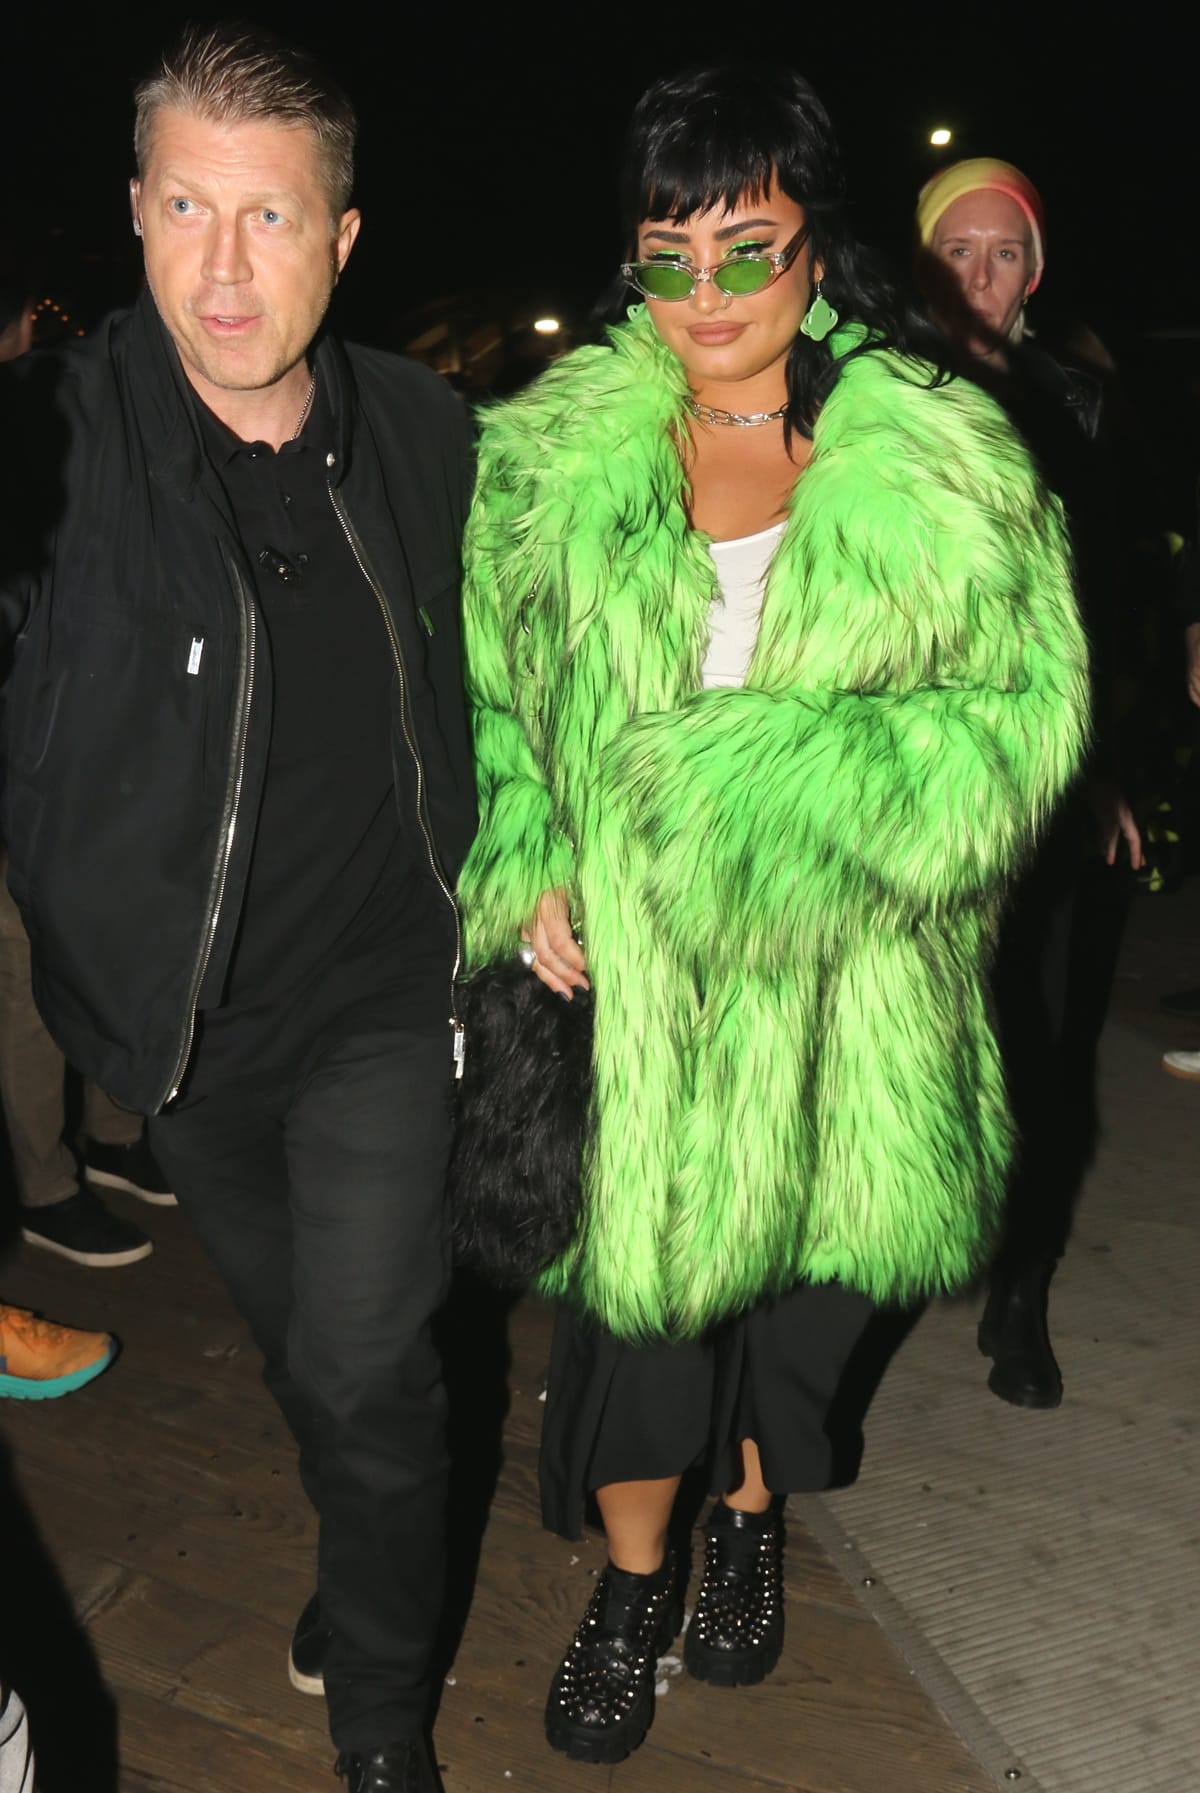 Demi Lovato in a green fur coat and studded booties arrives to celebrate Paris Hilton and Carter Reum‘s wedding